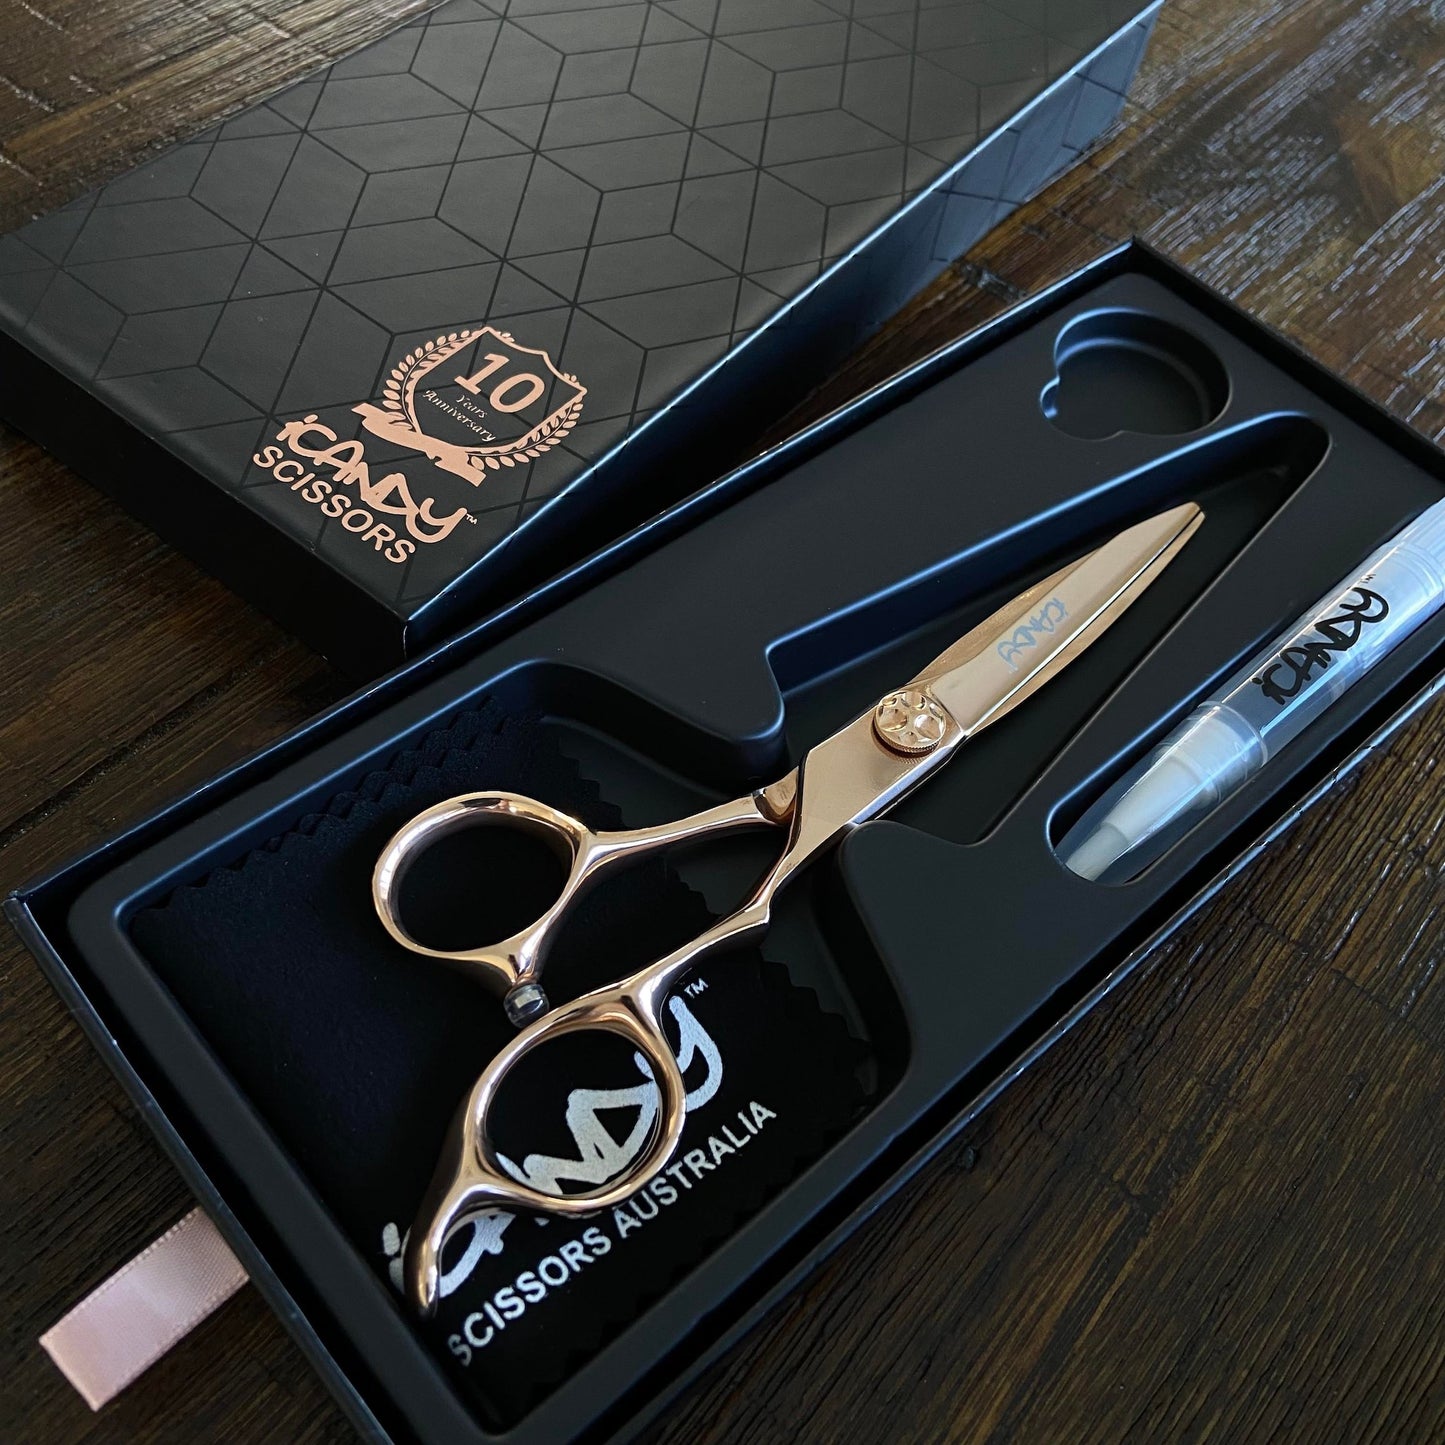 iCandy Sword Rose Gold VG10 6.1" 10 Years Anniversary Edition Scissors Open Box